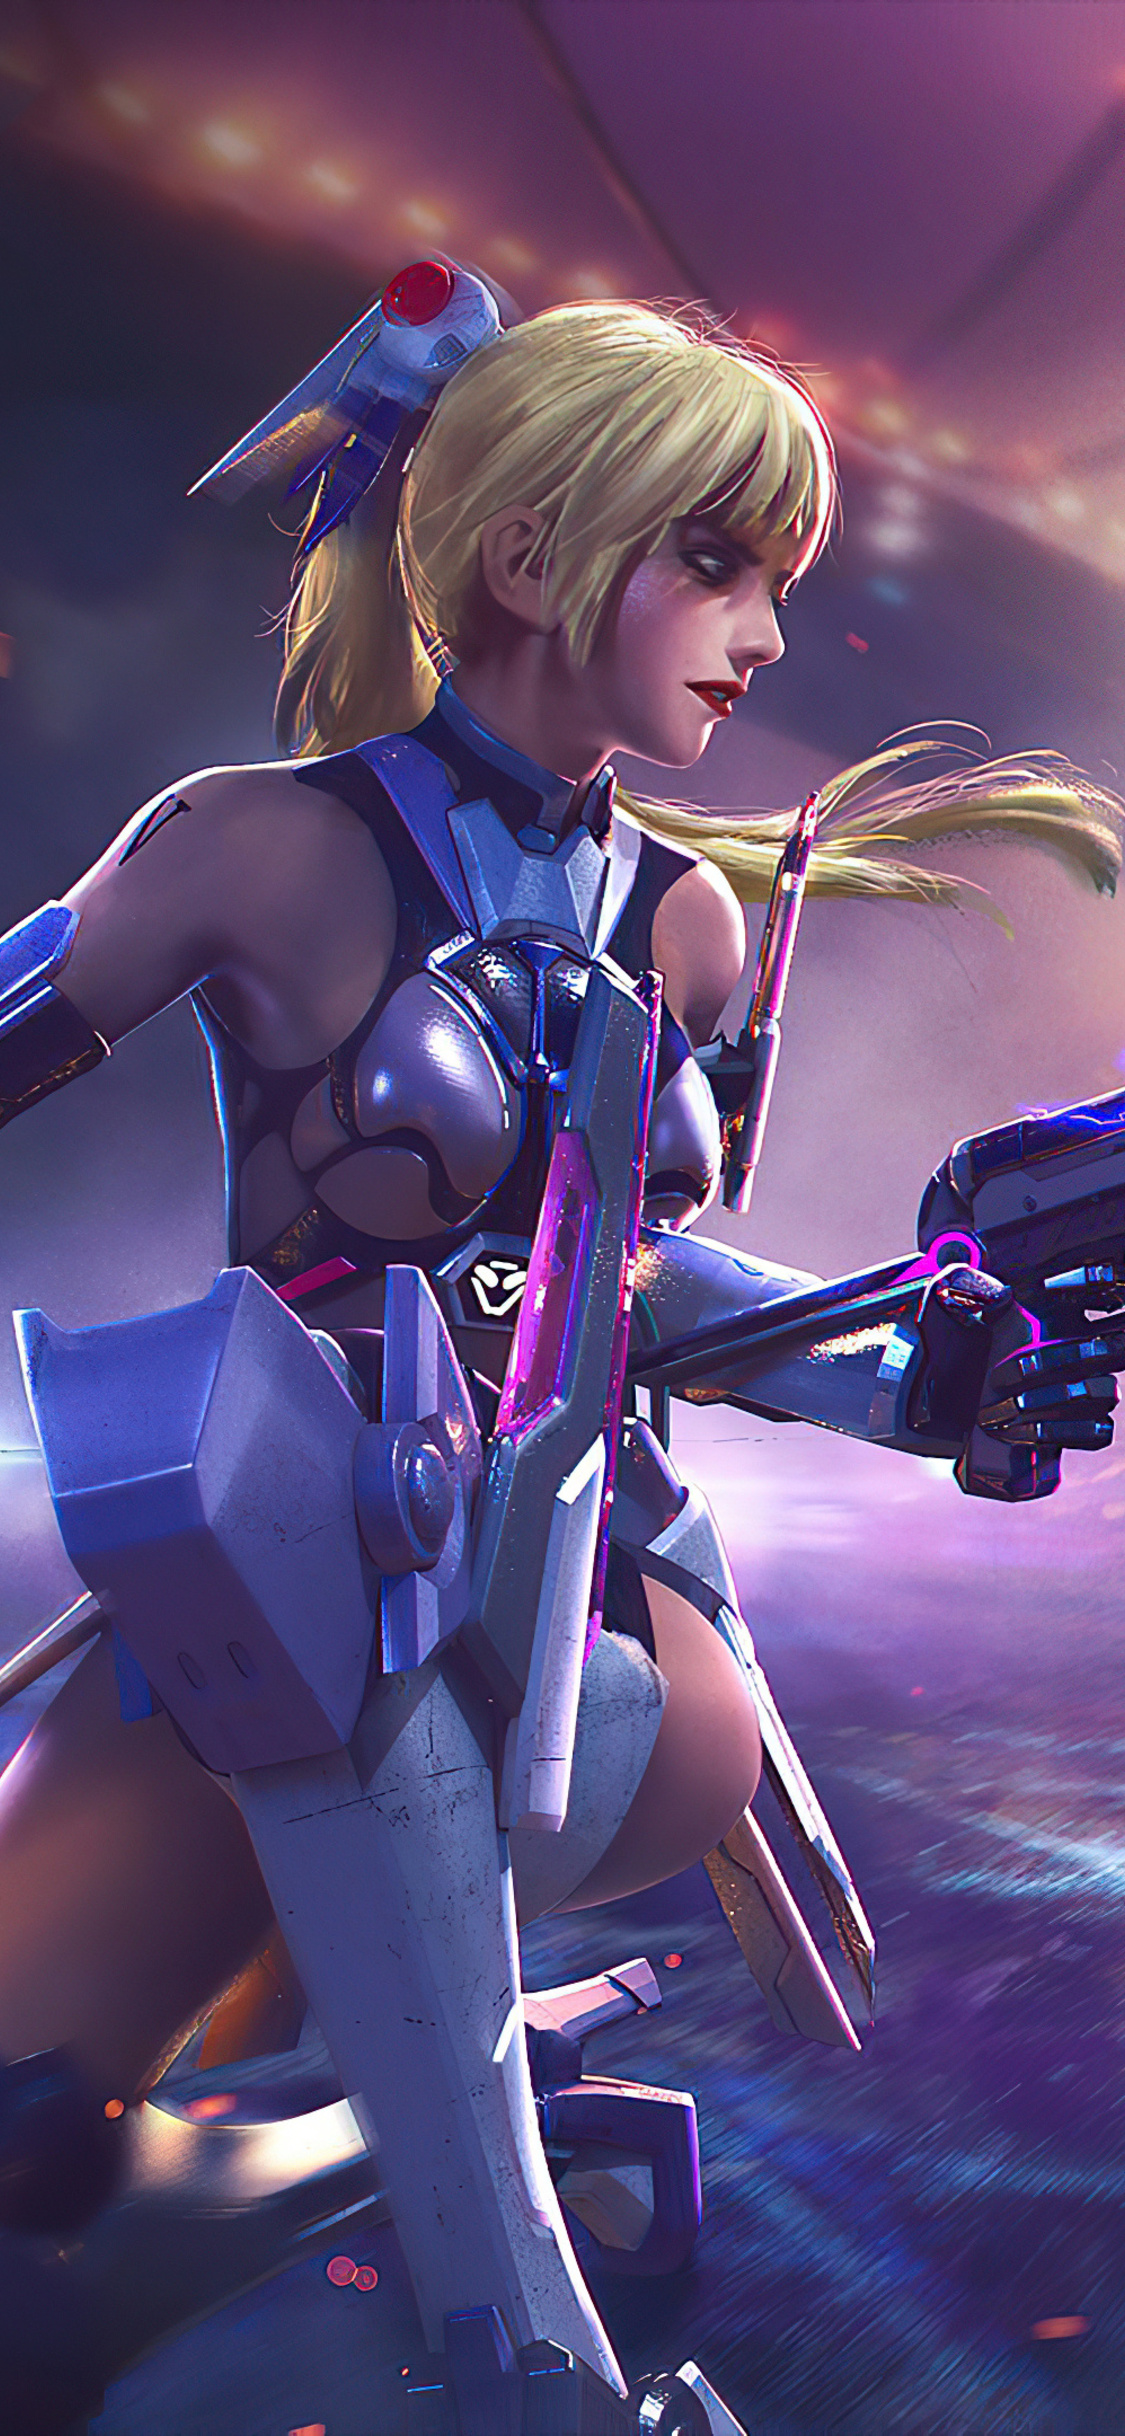 Cyber Girl Garena Free Fire Game 4k iPhone XS, iPhone iPhone X HD 4k Wallpaper, Image, Background, Photo and Picture